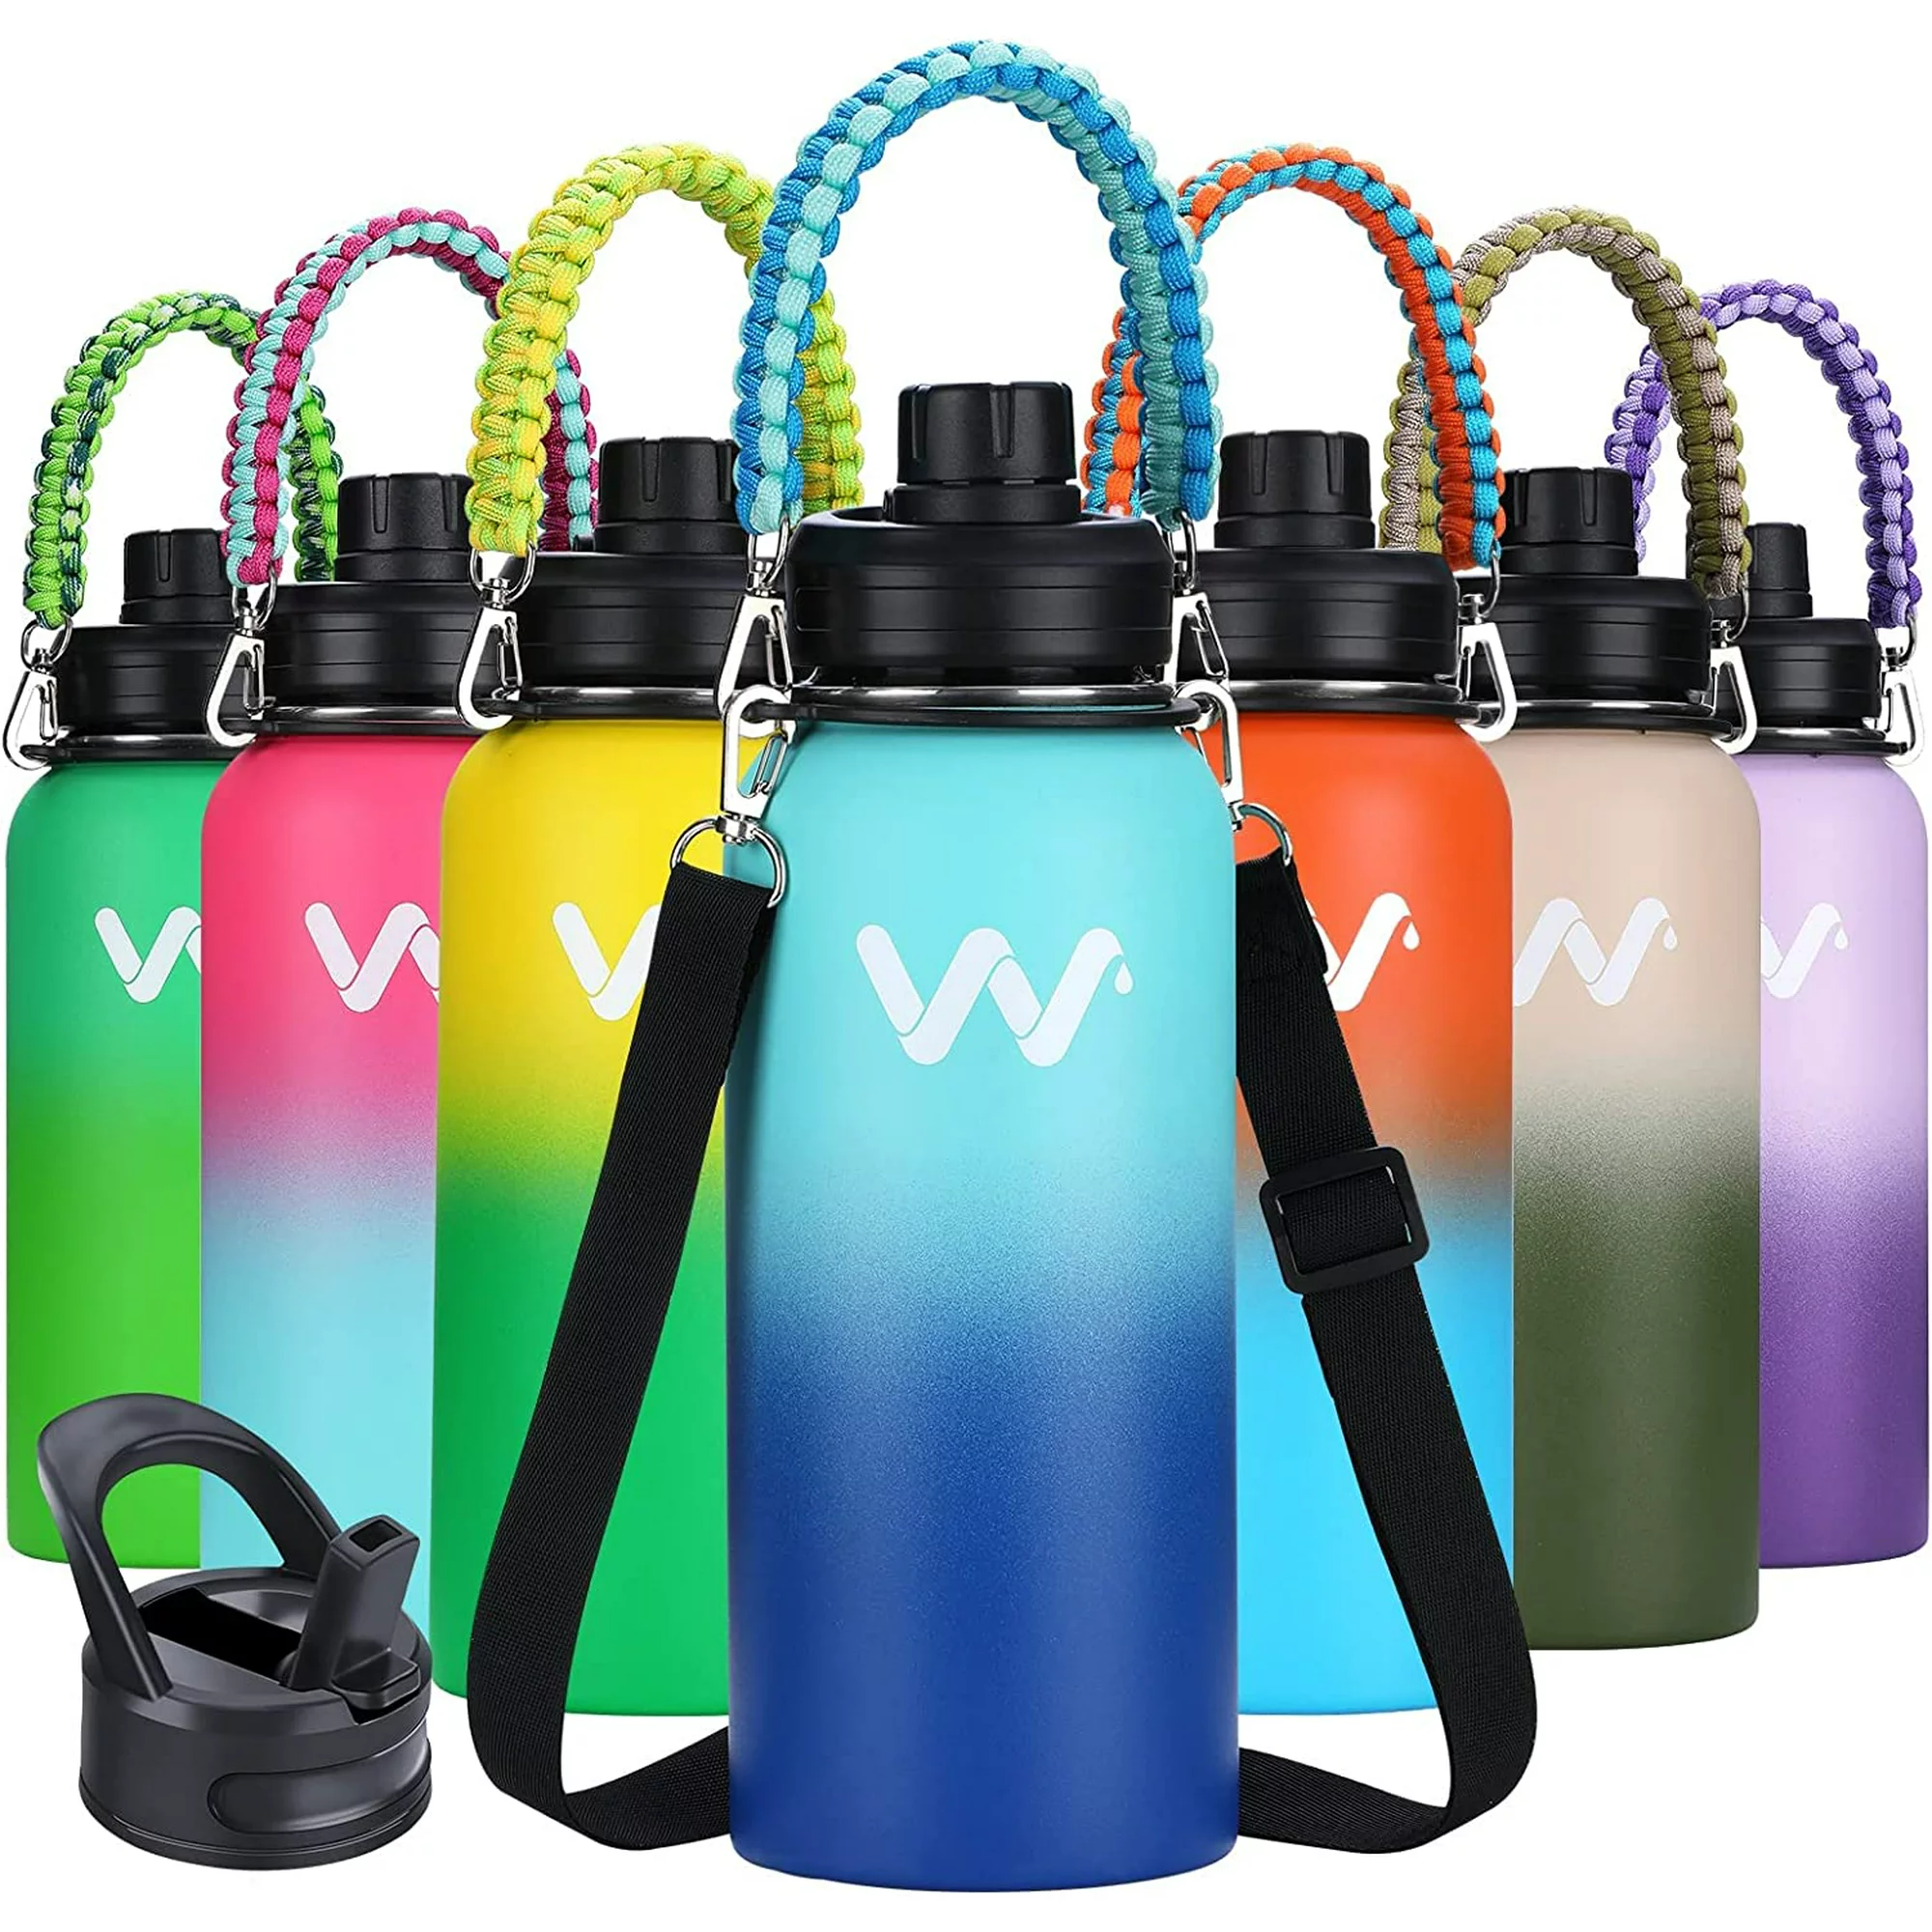 Volhoply 32 oz Insulated Water Bottles Bulk 4 Pack with Straw Lid